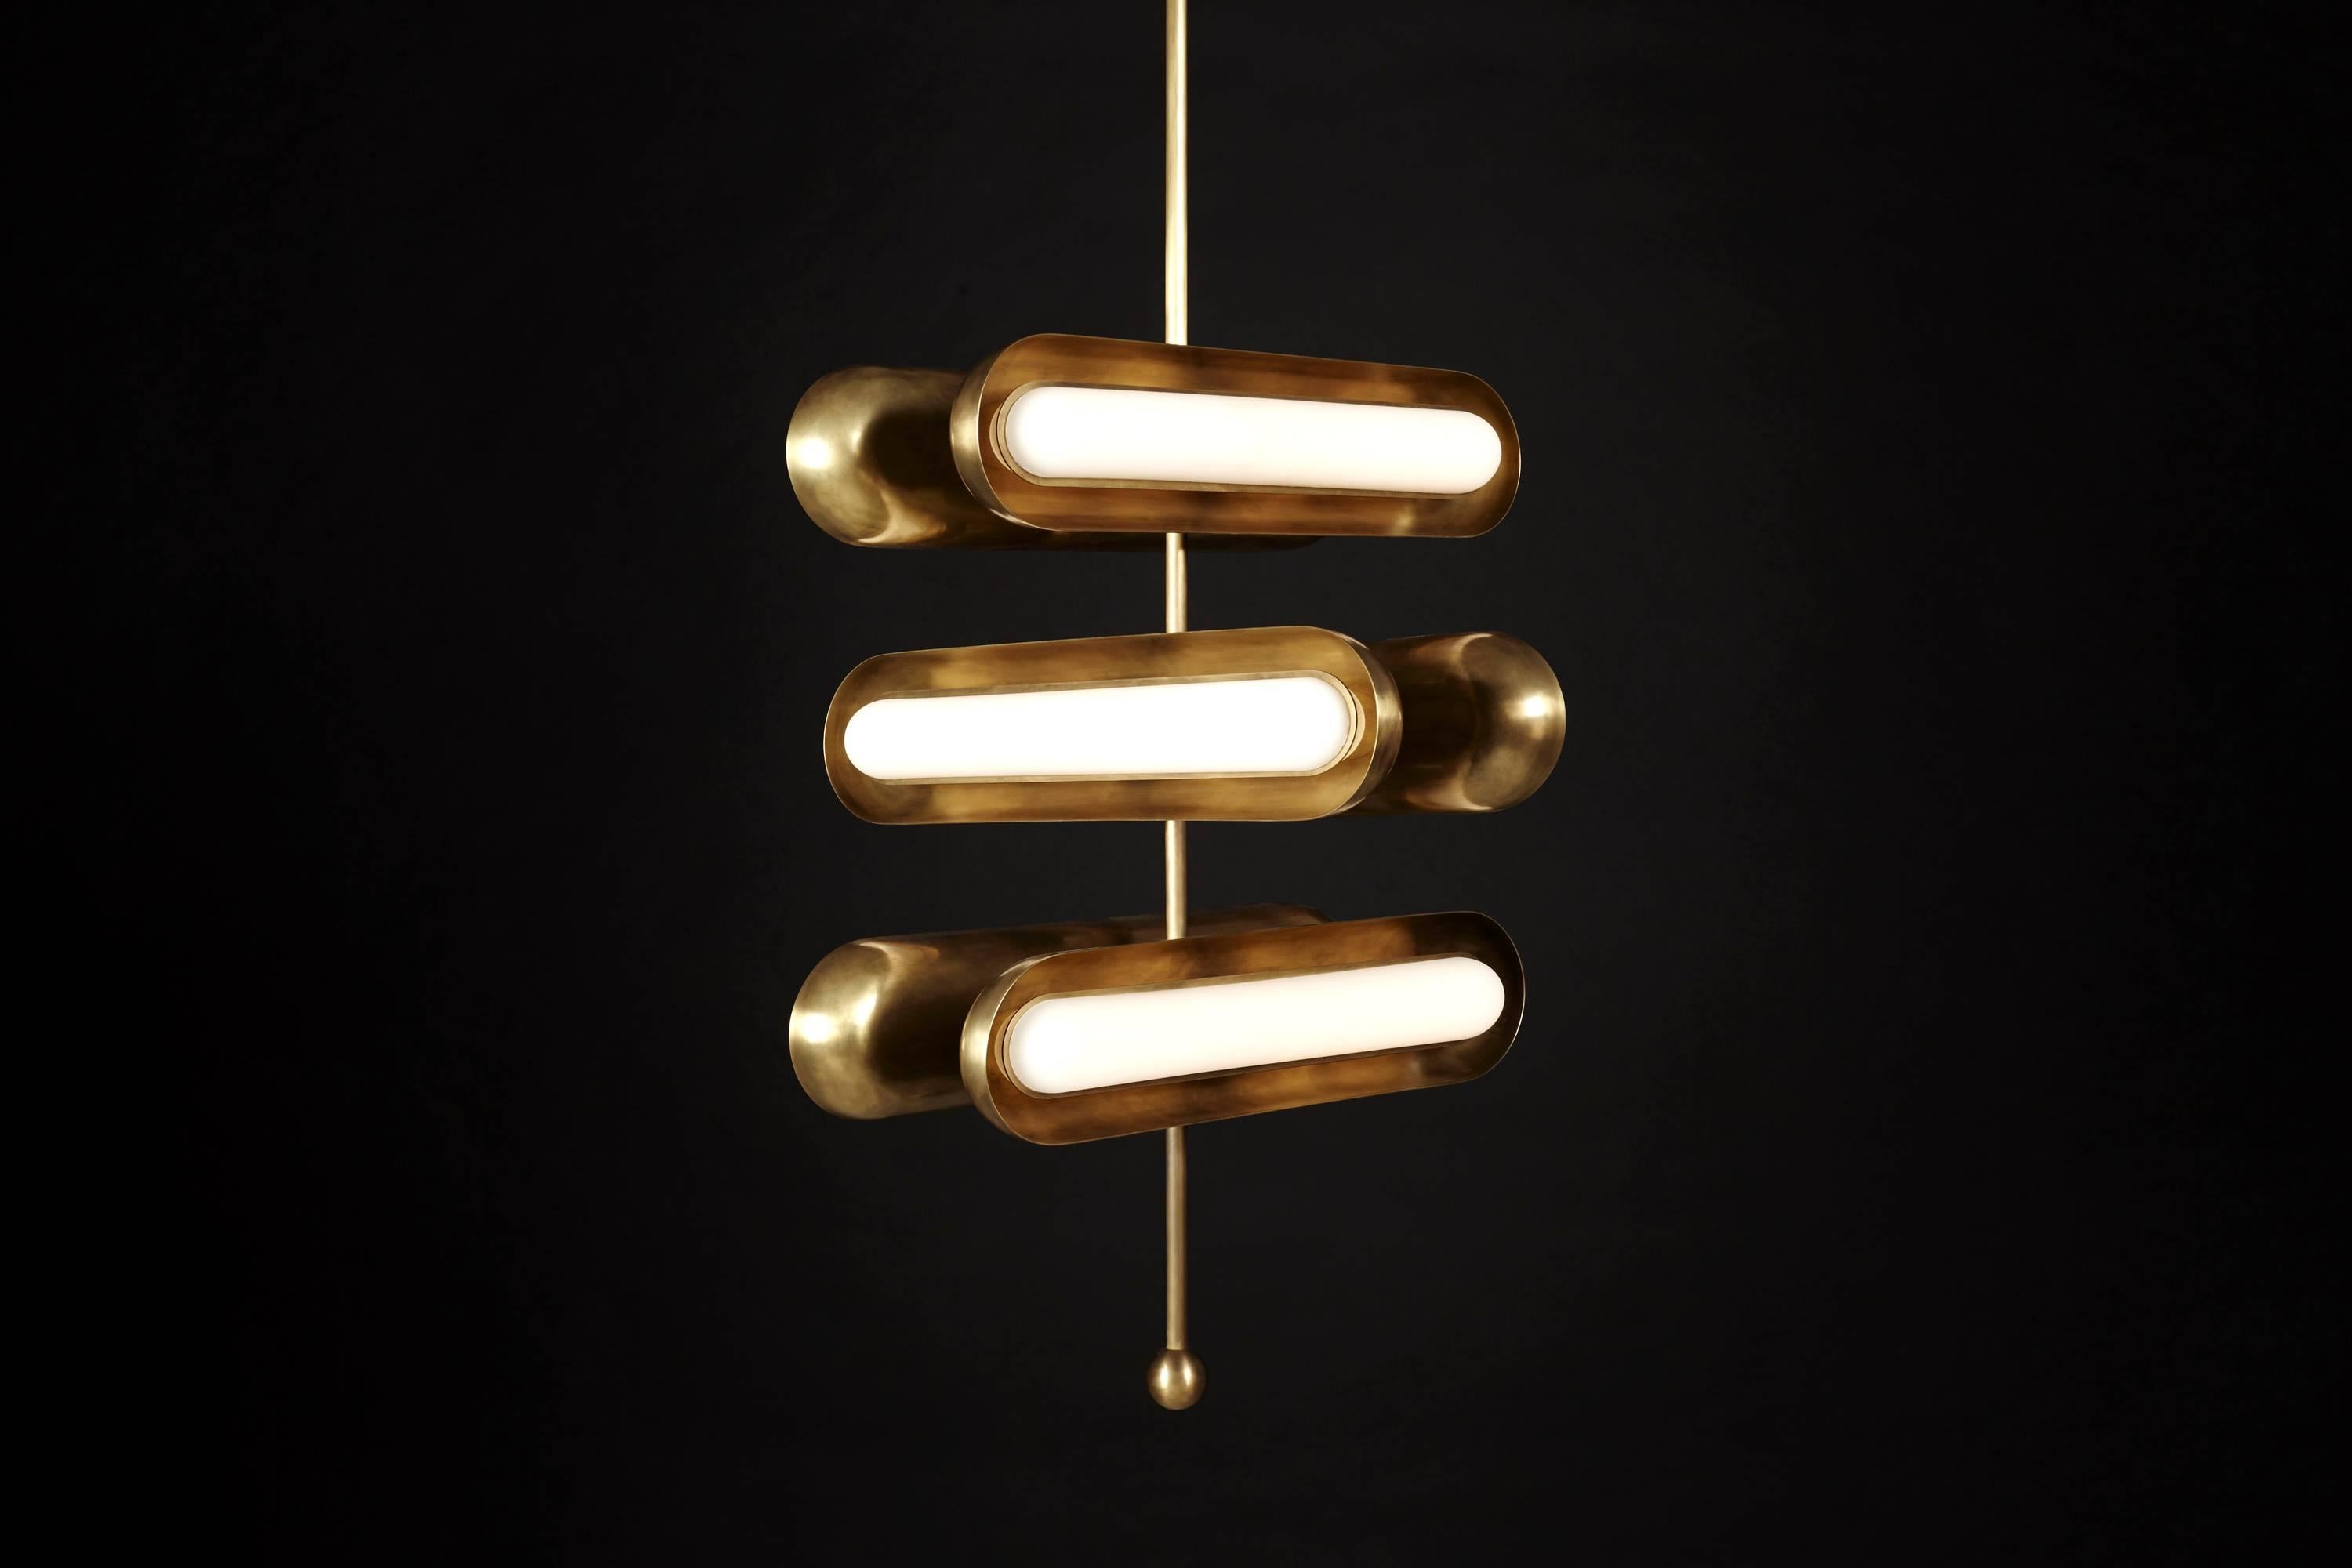 The Circuit series creates rhythm with the repetition of pure shapes. A glowing glass capsule nests in a brass shade, becoming a contained form that multiplies to construct larger fixtures.

The Circuit 6 stacked uses a specially developed, warm LED